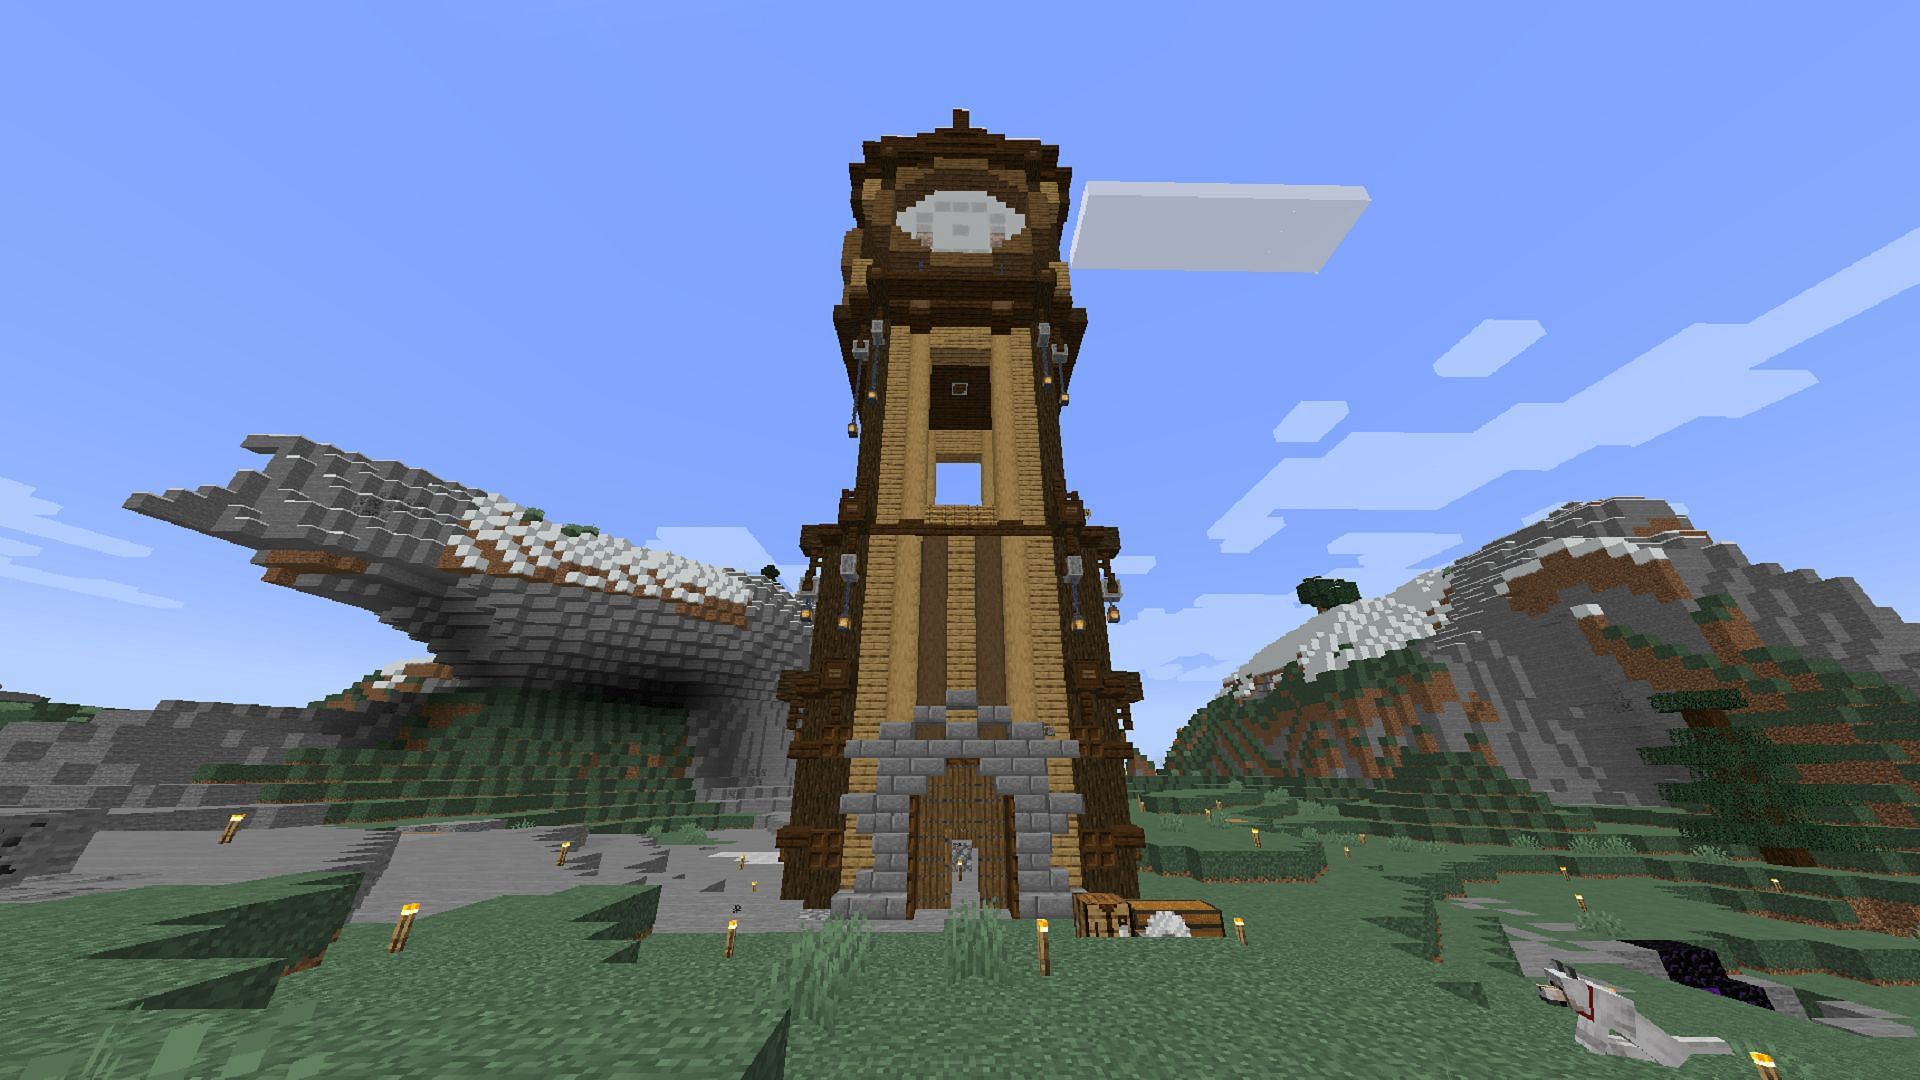 A clock tower looms over the surrounding landscape (Image via u/daily-dose-of-iron/Reddit)